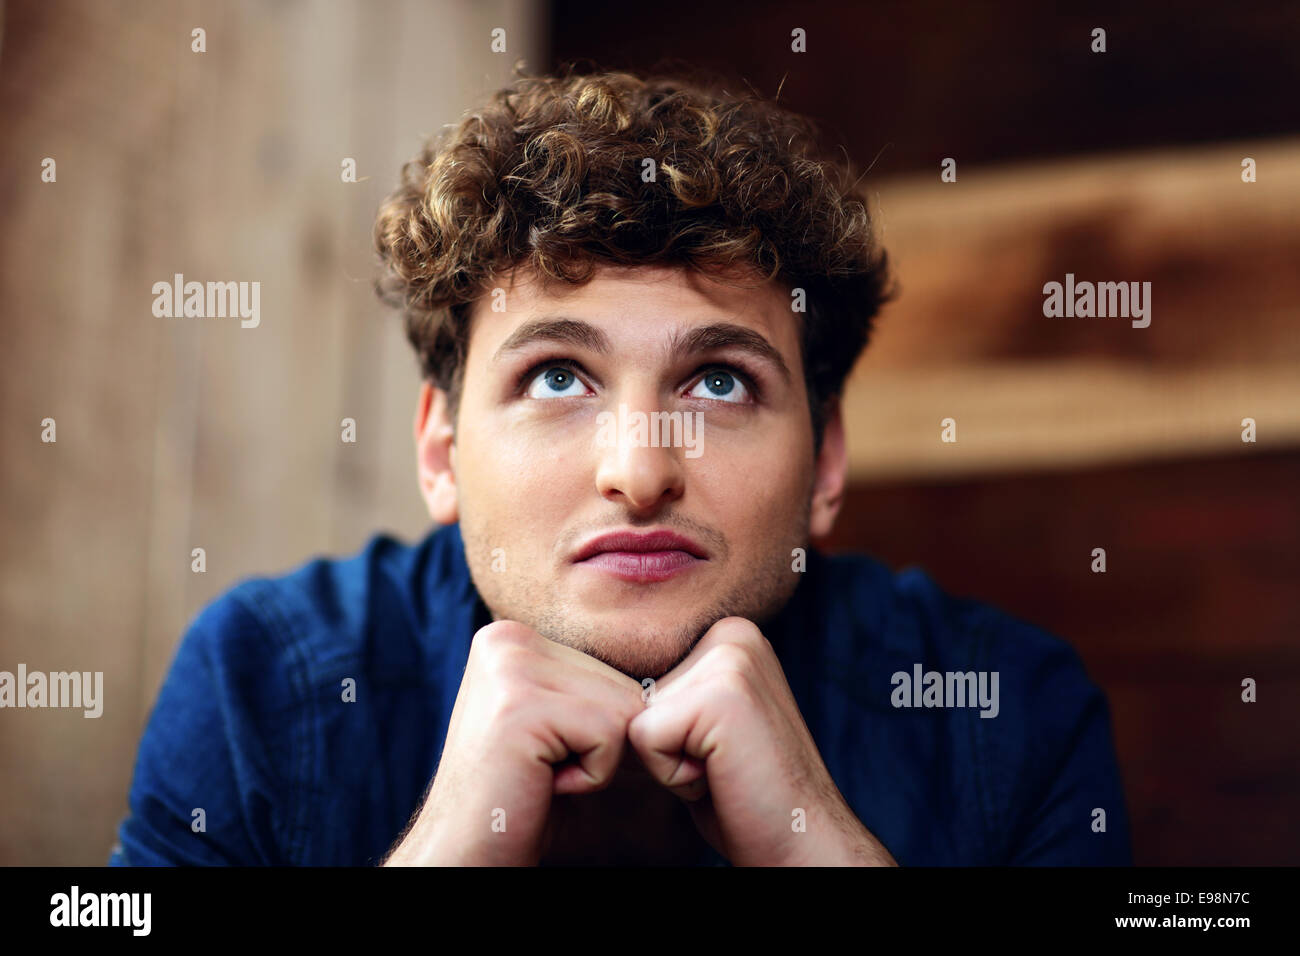 Portrait of a smiling man with curly hair looking up Banque D'Images